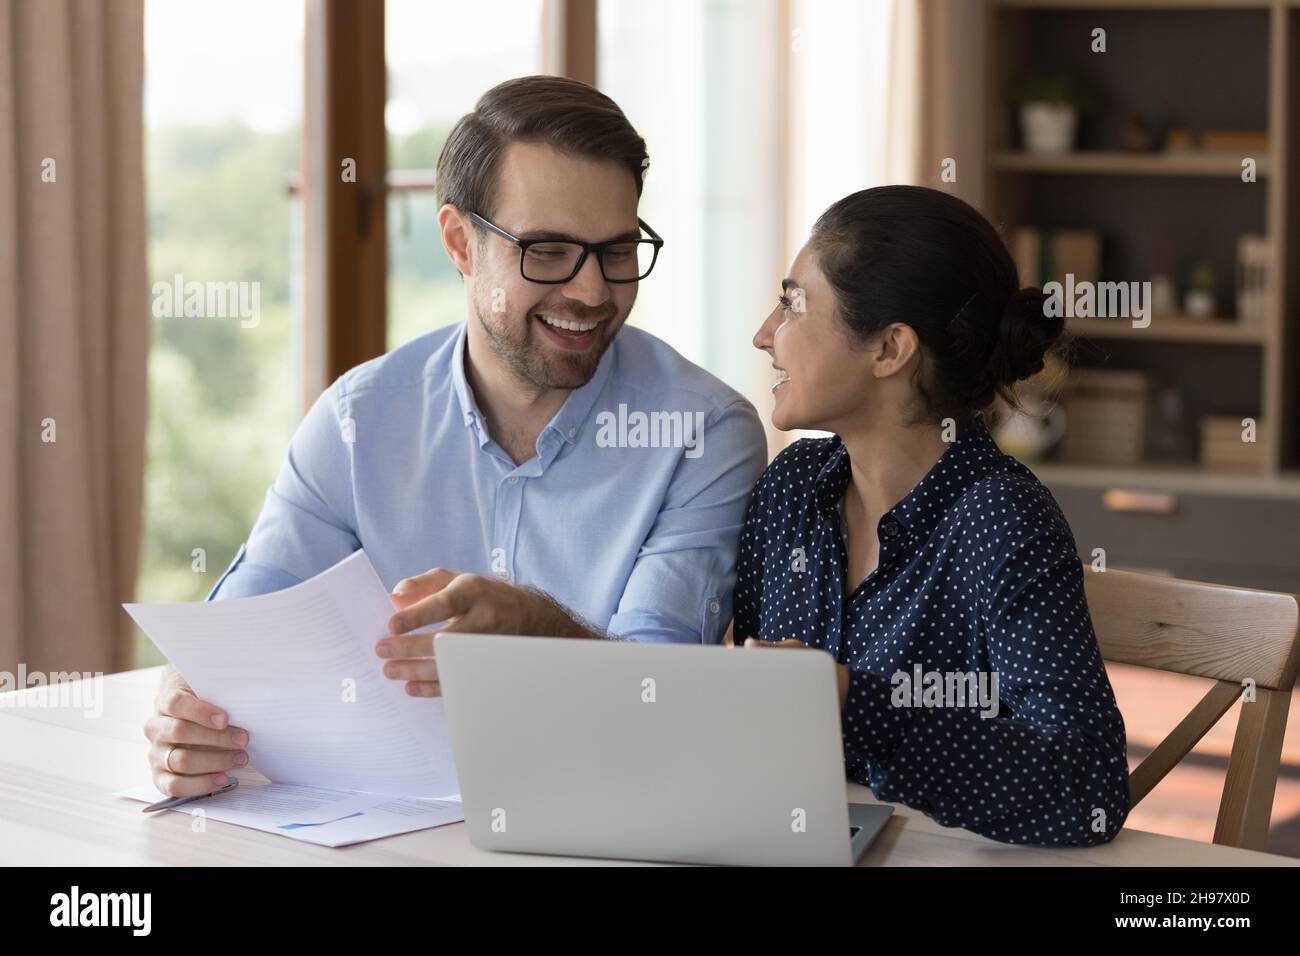 Happy multiethnic professional coworkers talking and laughing at workplace Stock Photo